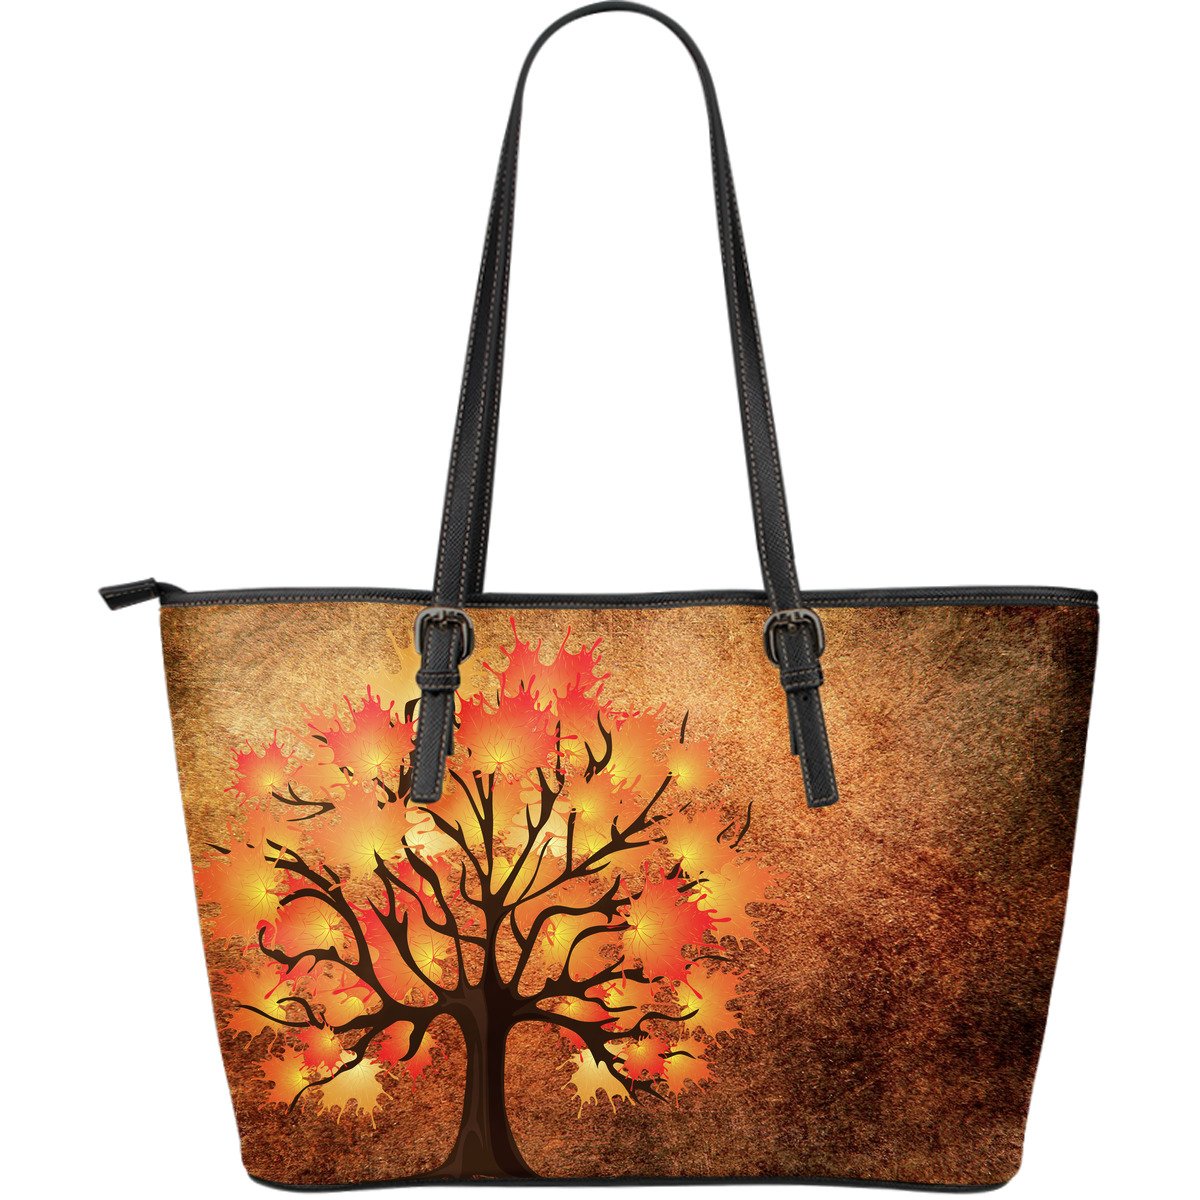 canada-maple-leaf-04-large-leather-tote-bags